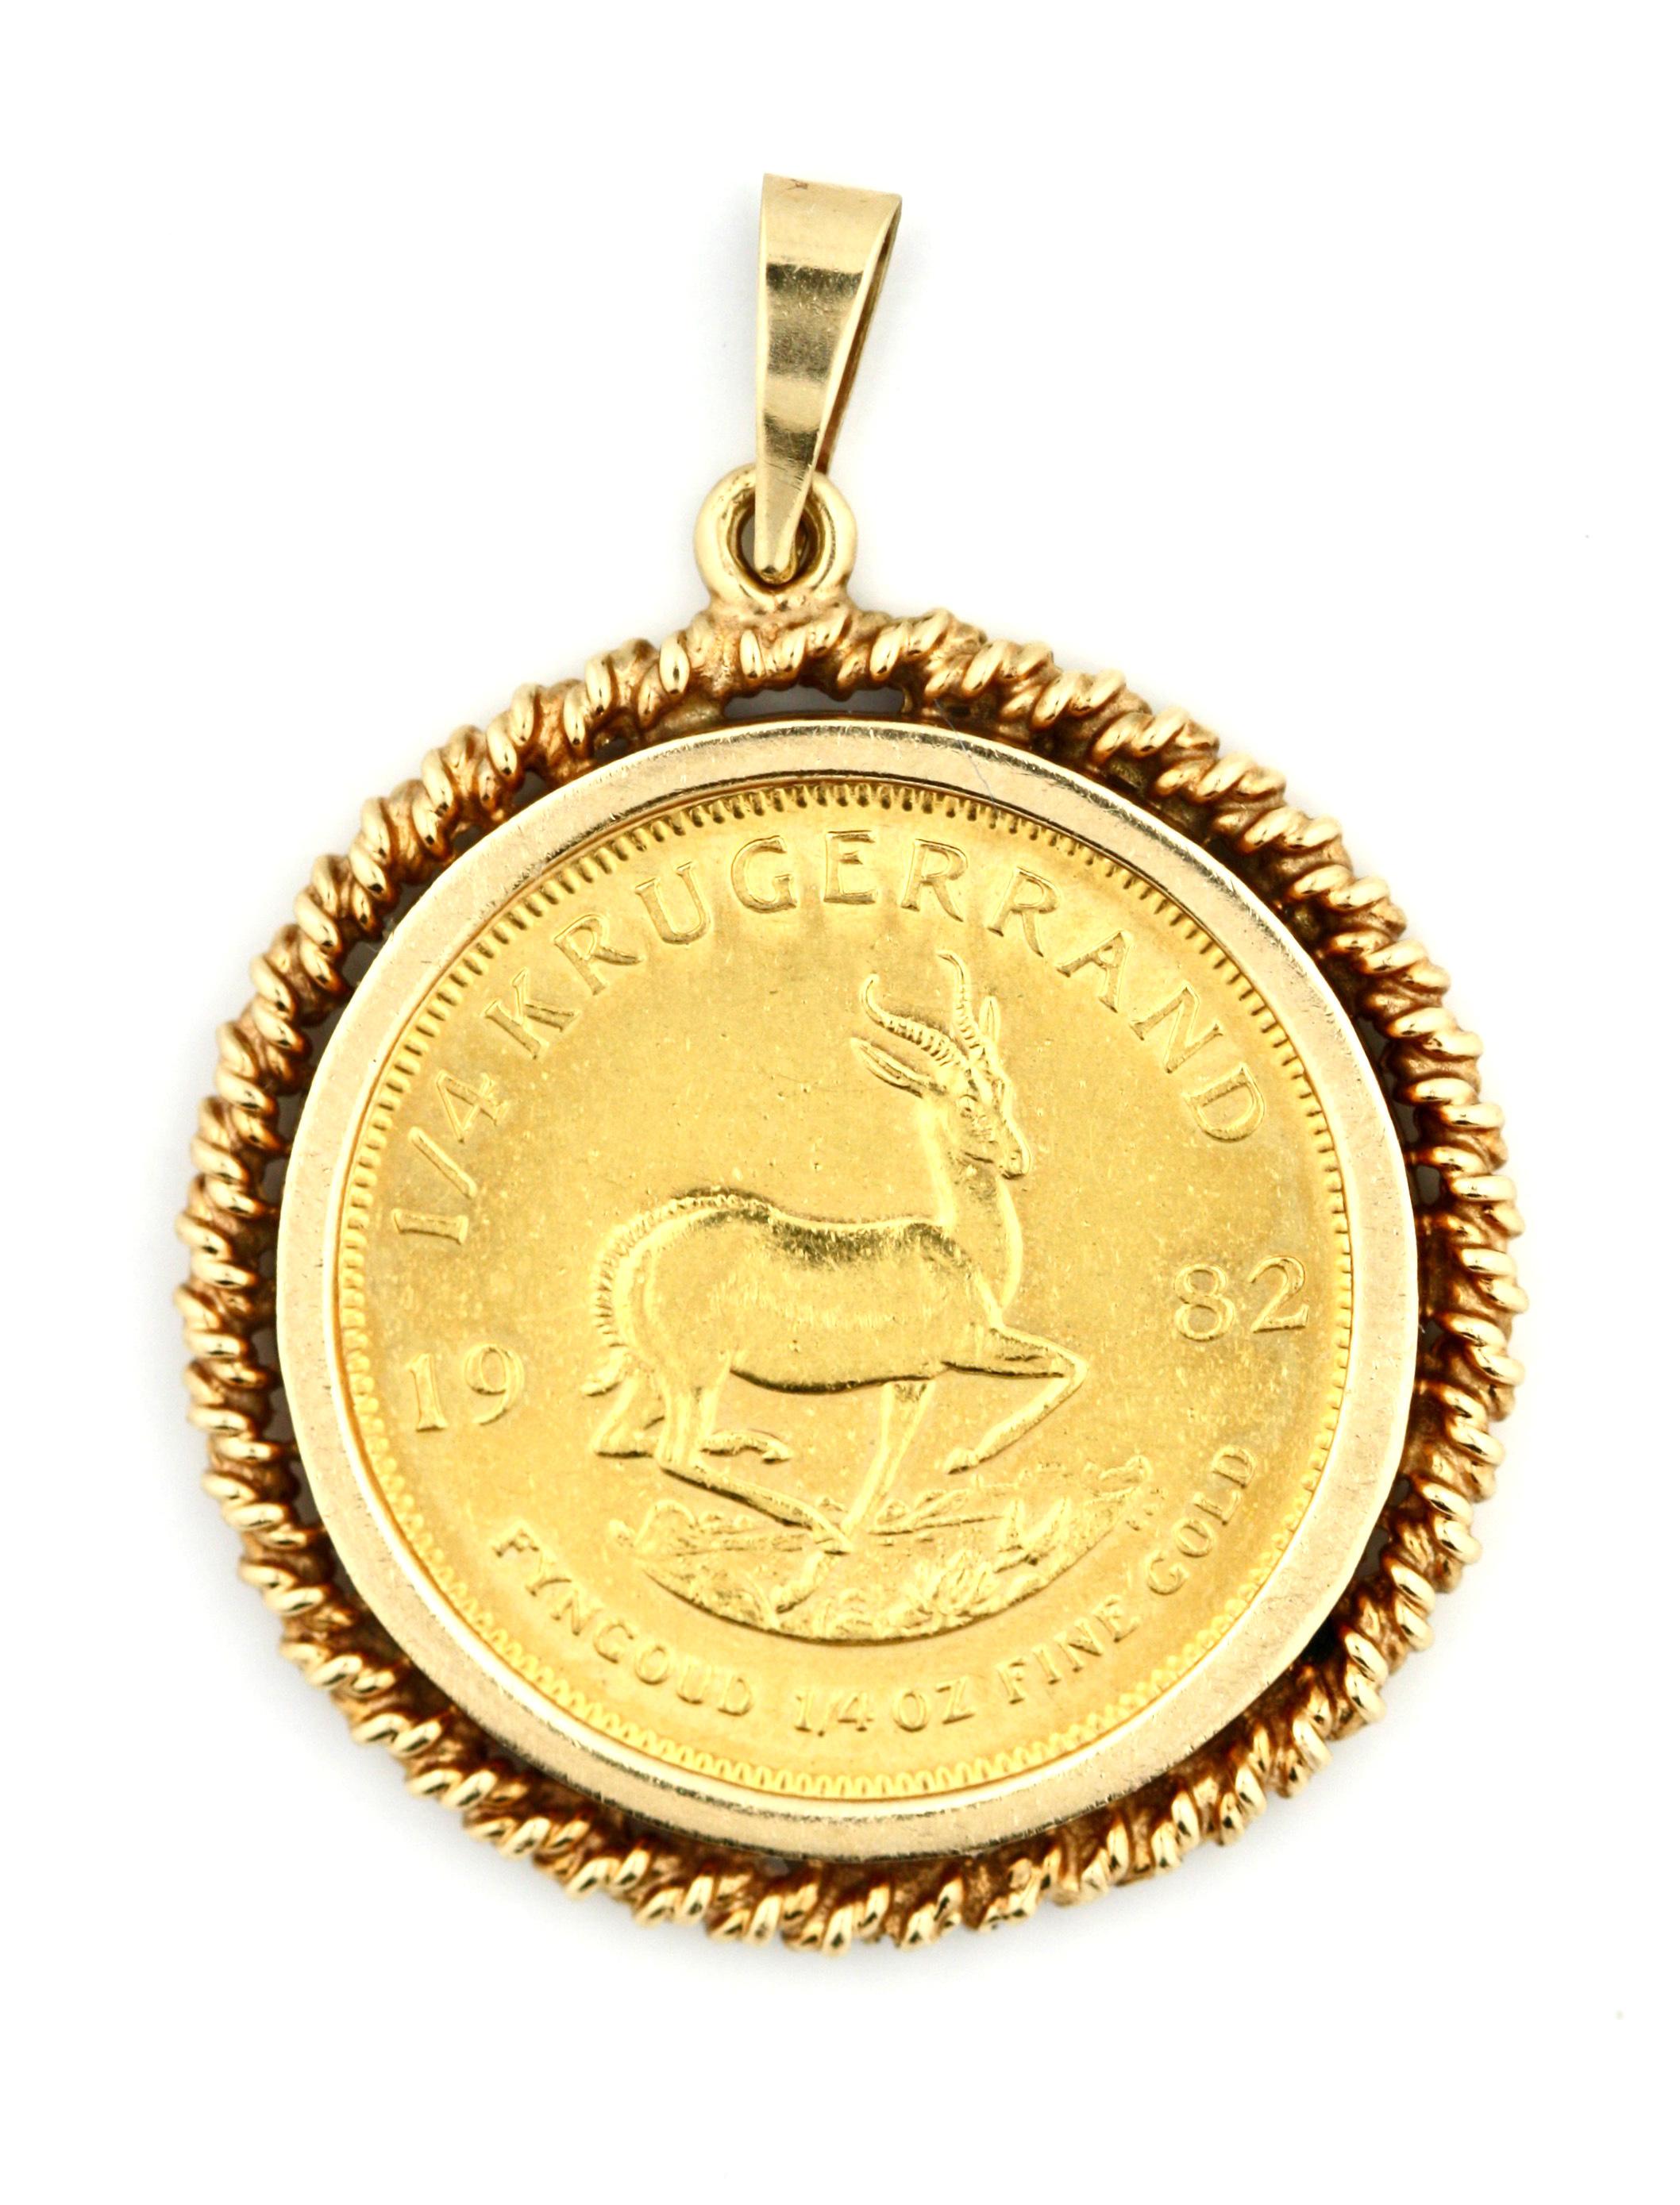 Gold and KRUGERAND Coin Pendant
Centered with a 1/4 South African Gold KRUGERAND within a decorative gold frame,
dated 1982
coin is a 1/4 ounce of fine gold
gross weight approximately 12 grams
length measuring approx. 29mm excluding hoop